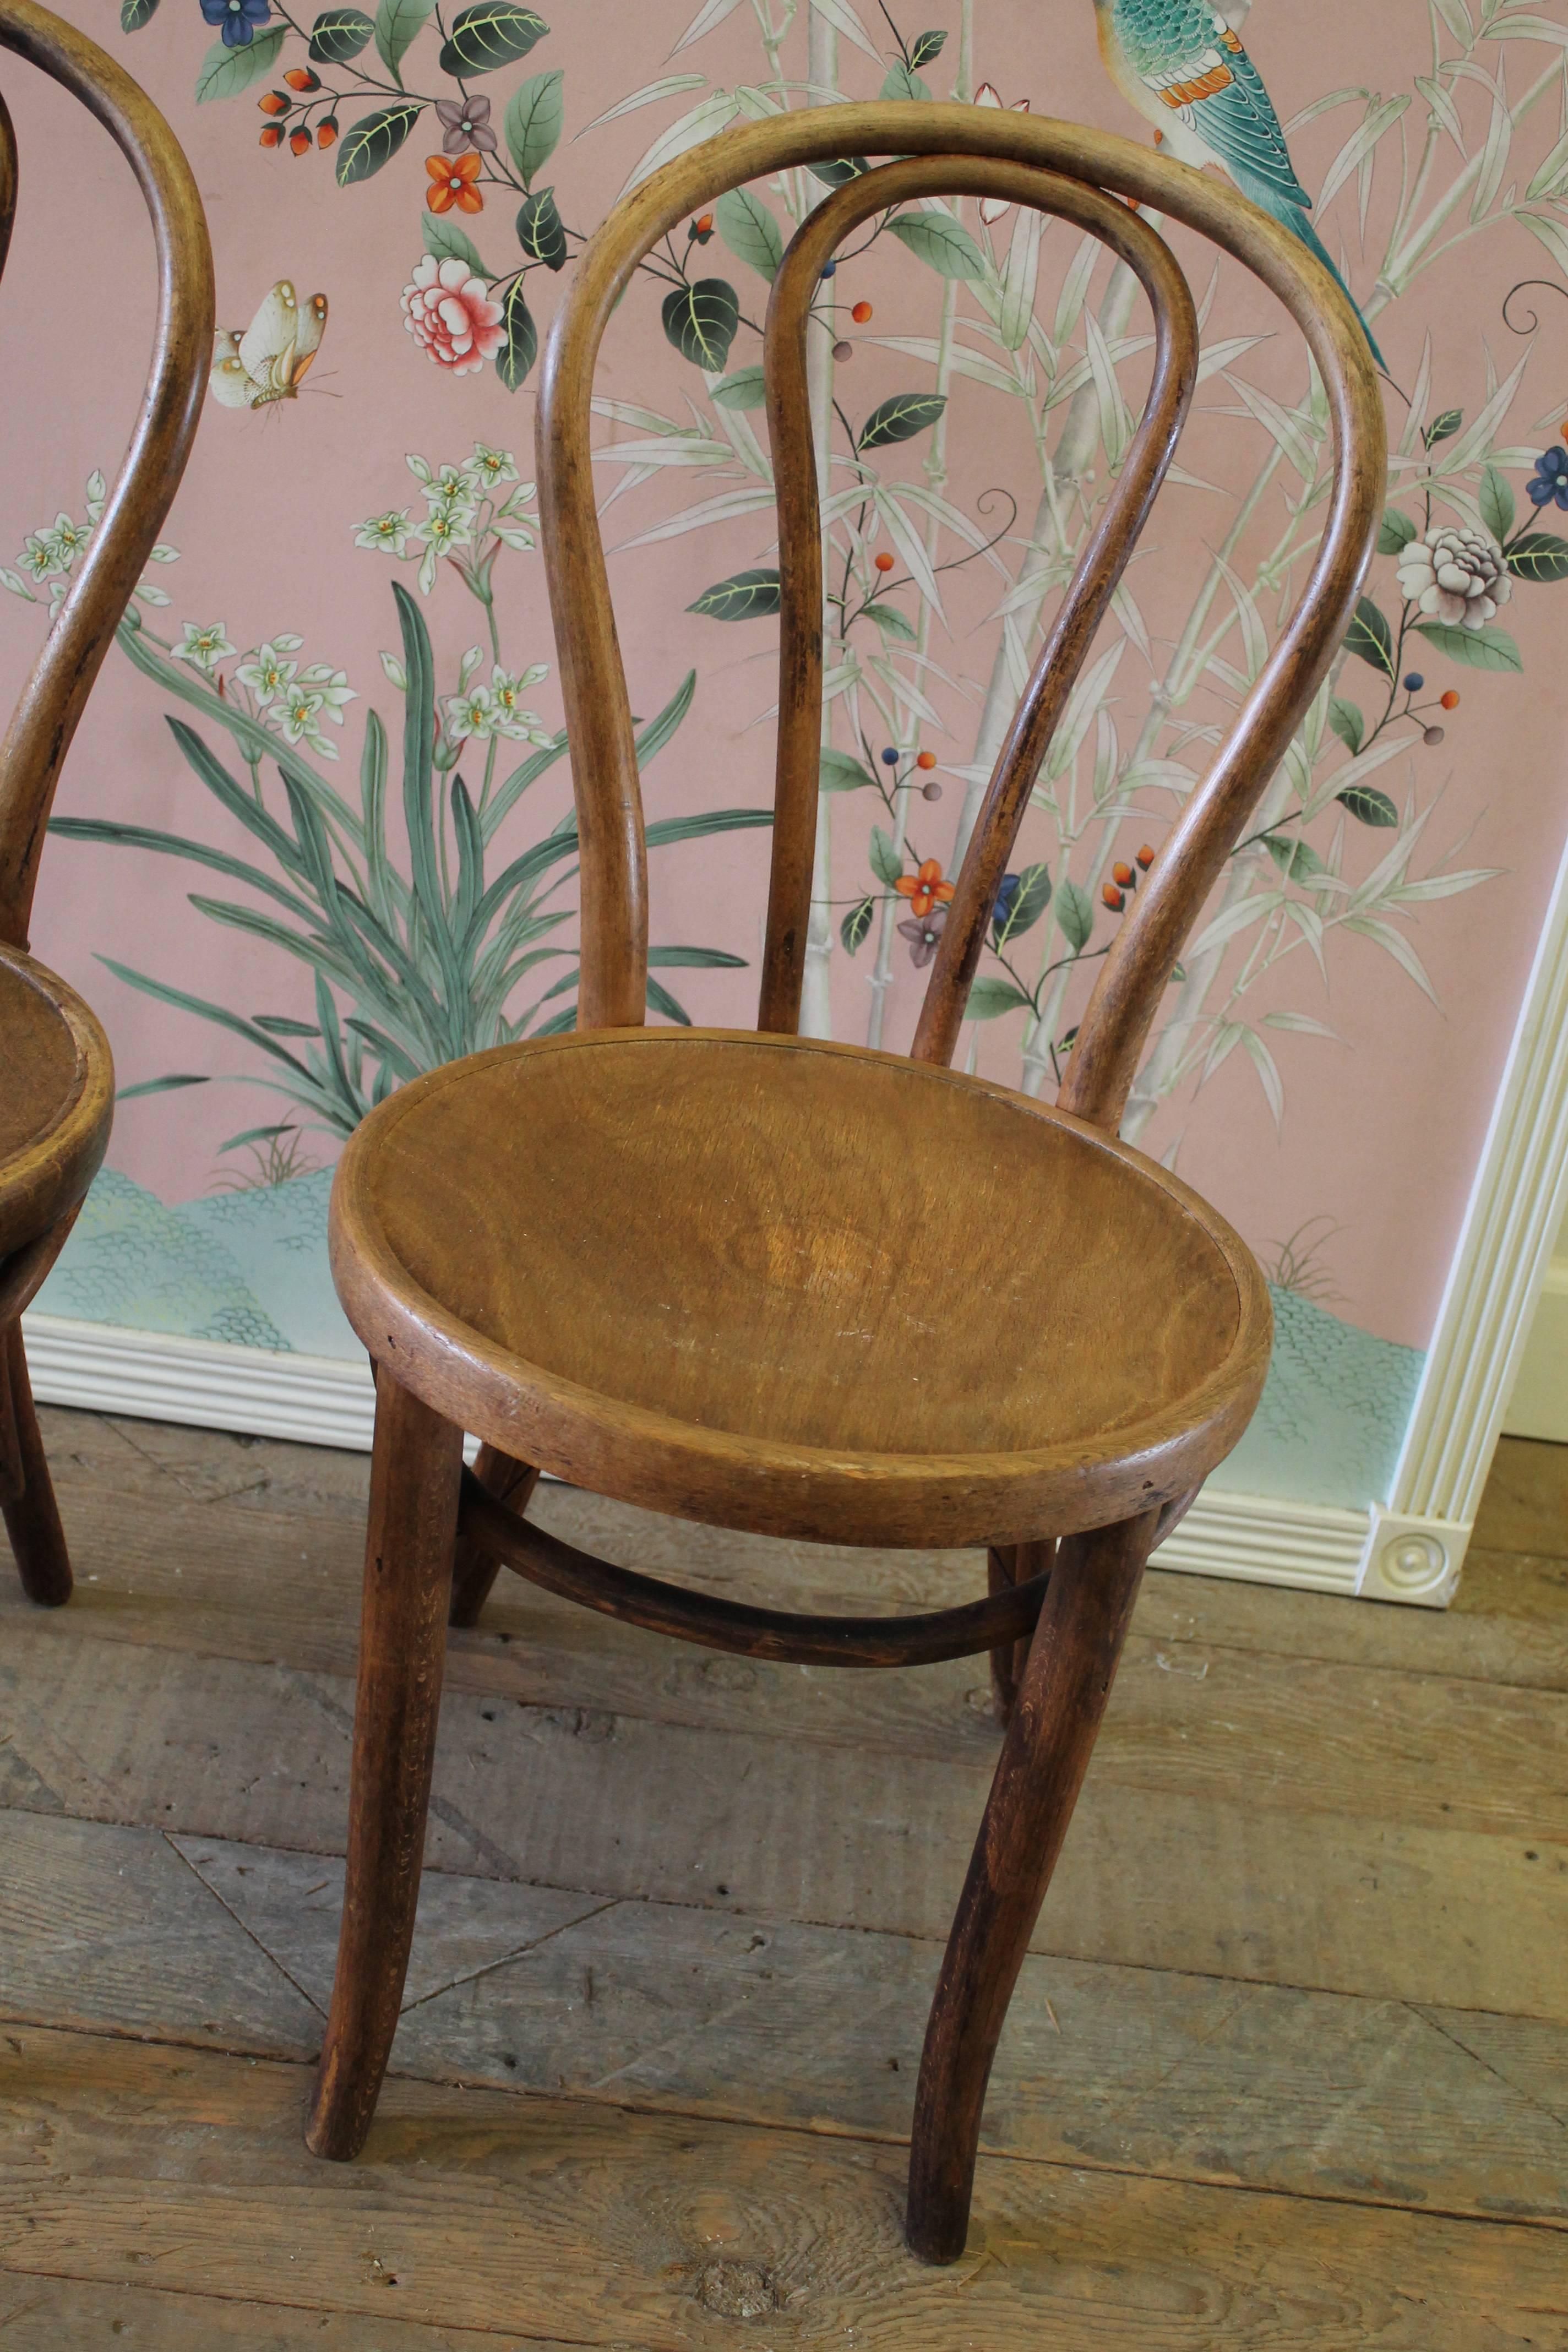 Pair of Vintage Bentwood Chairs with Embossed Wood Seat
Each chair is very sturdy, with aged patina to the wood. Seat has a scroll and floral motif.
Measures approximately 17x18x37